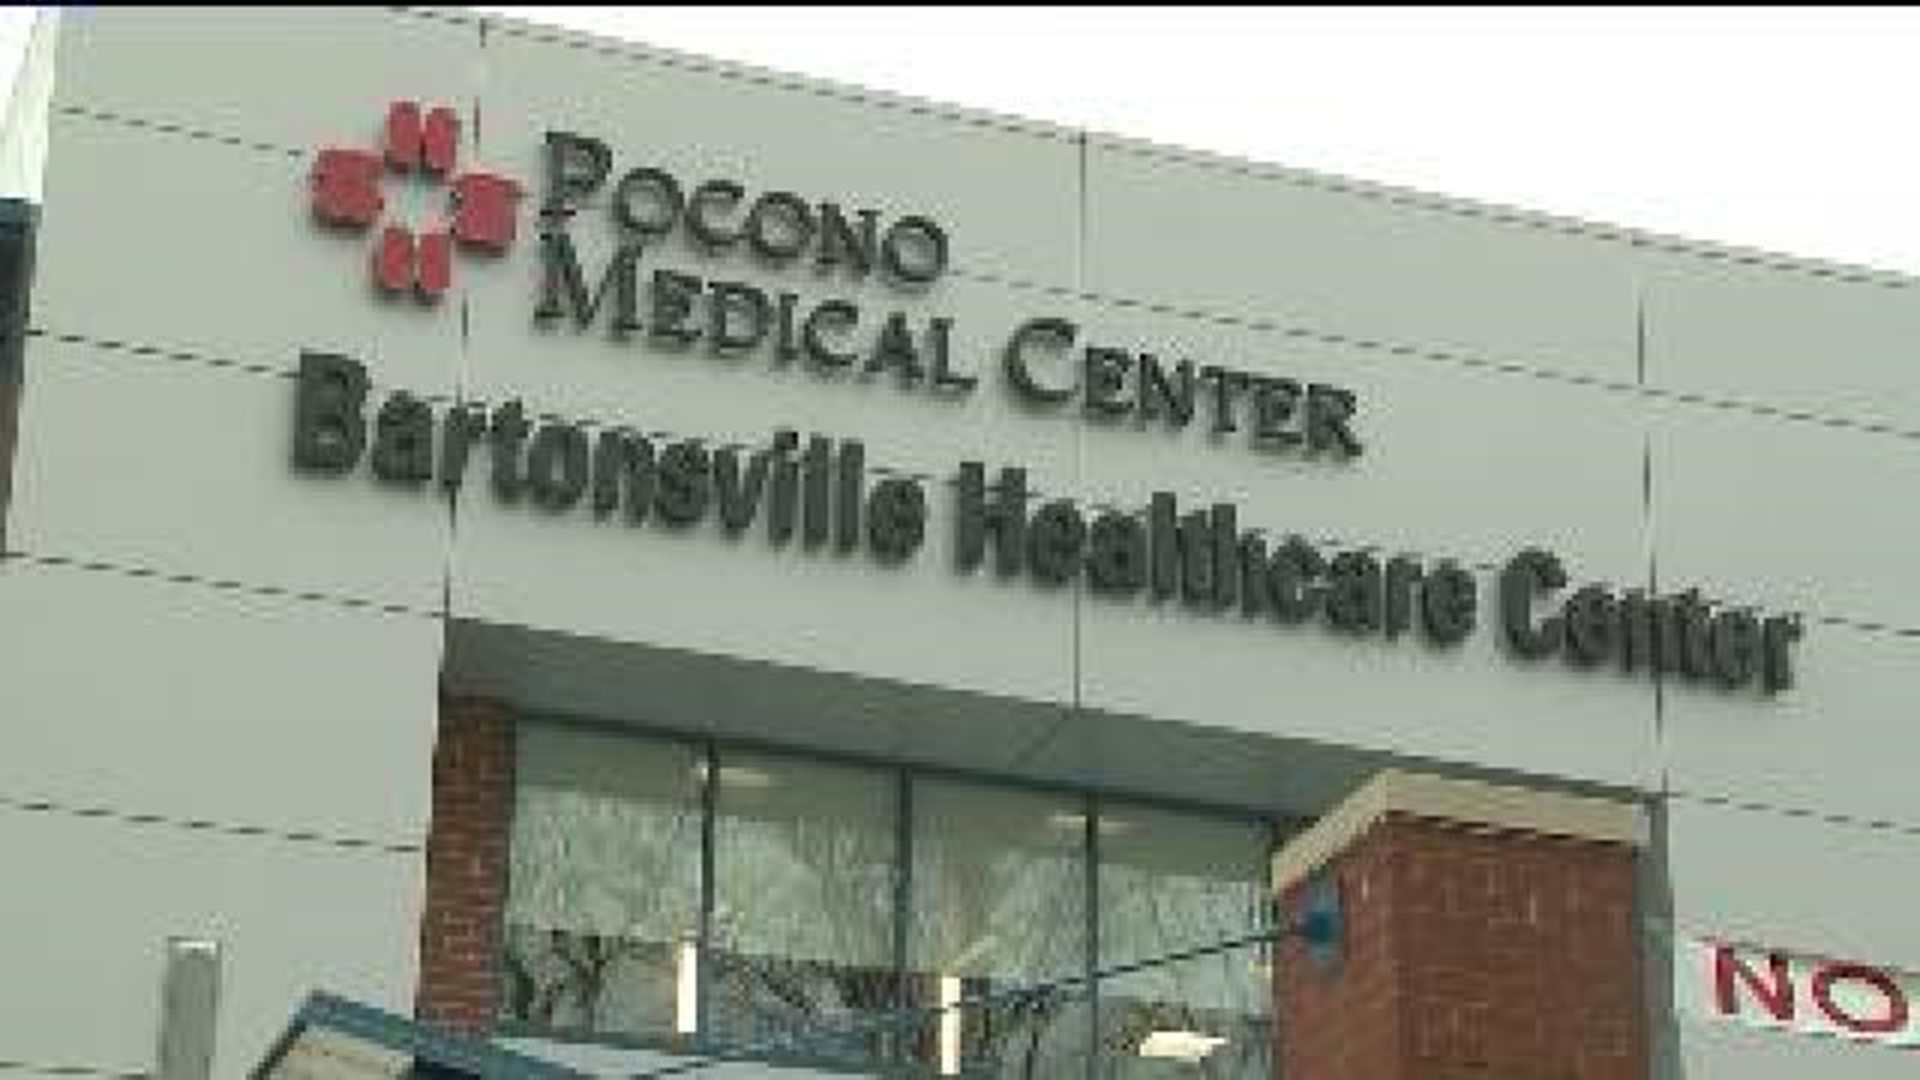 New Medical Center Offers ‘No Waiting’